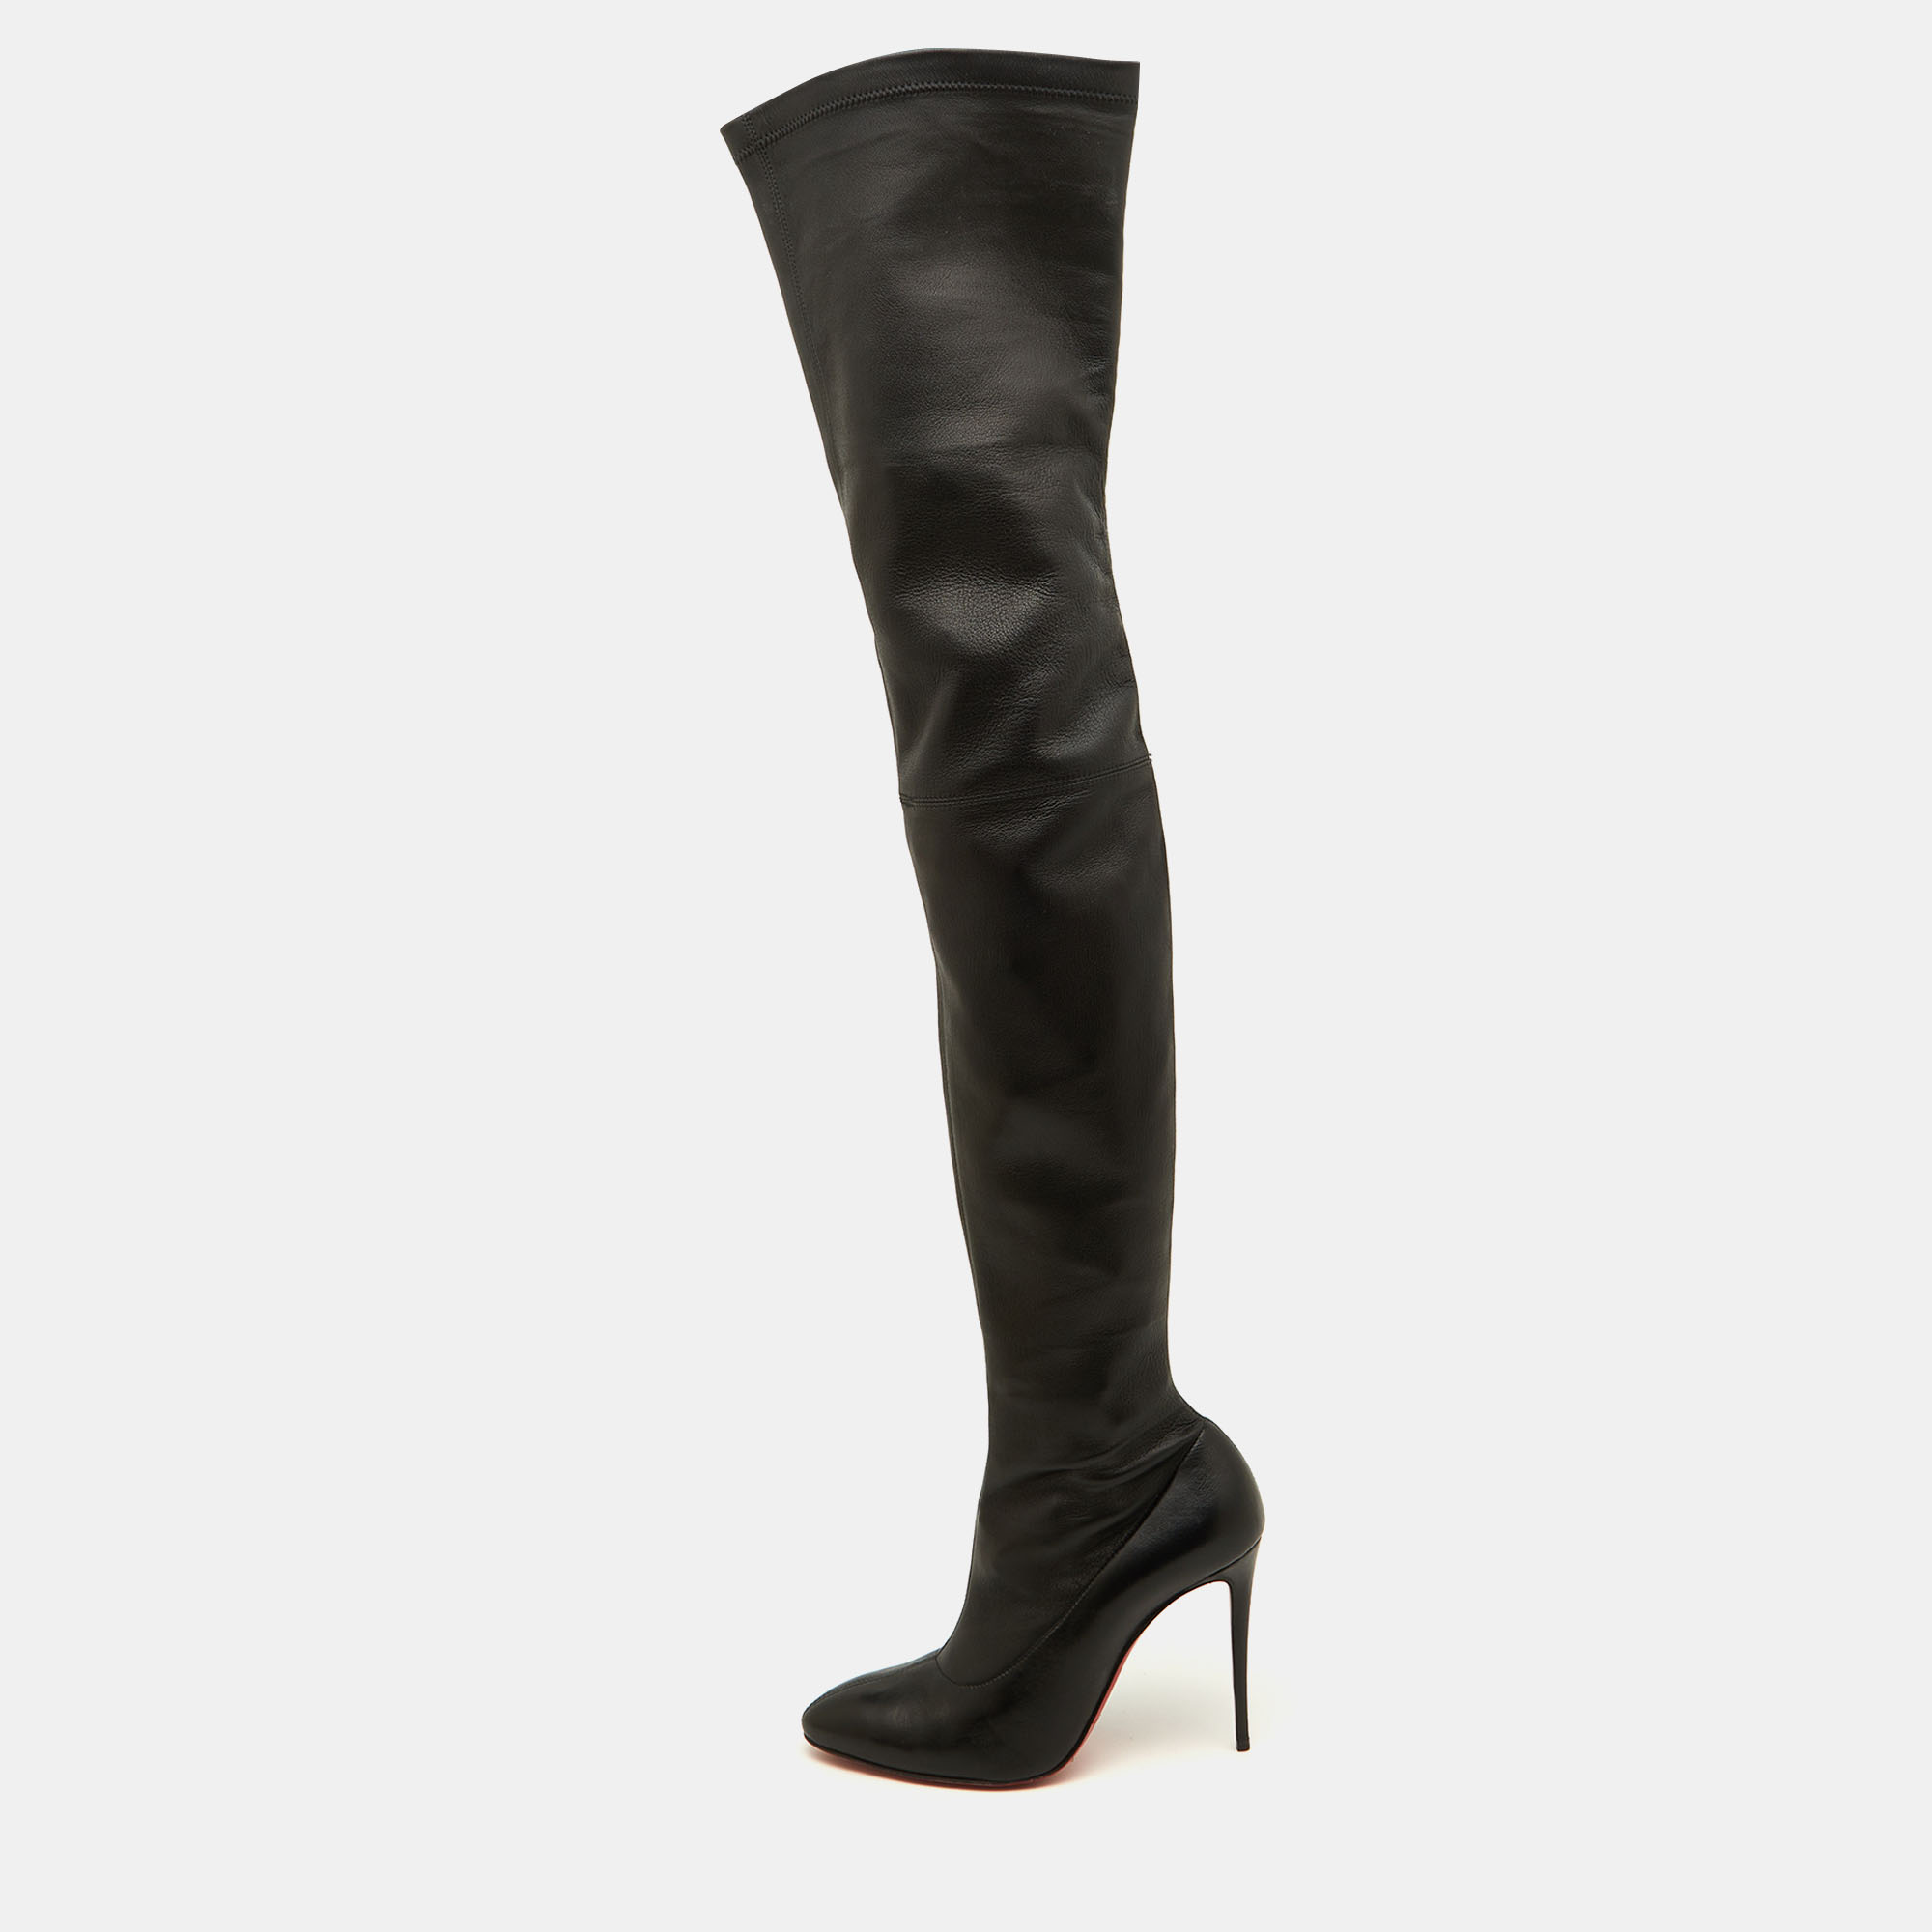 Pre-owned Christian Louboutin Black Leather Thigh High Boots Size 38